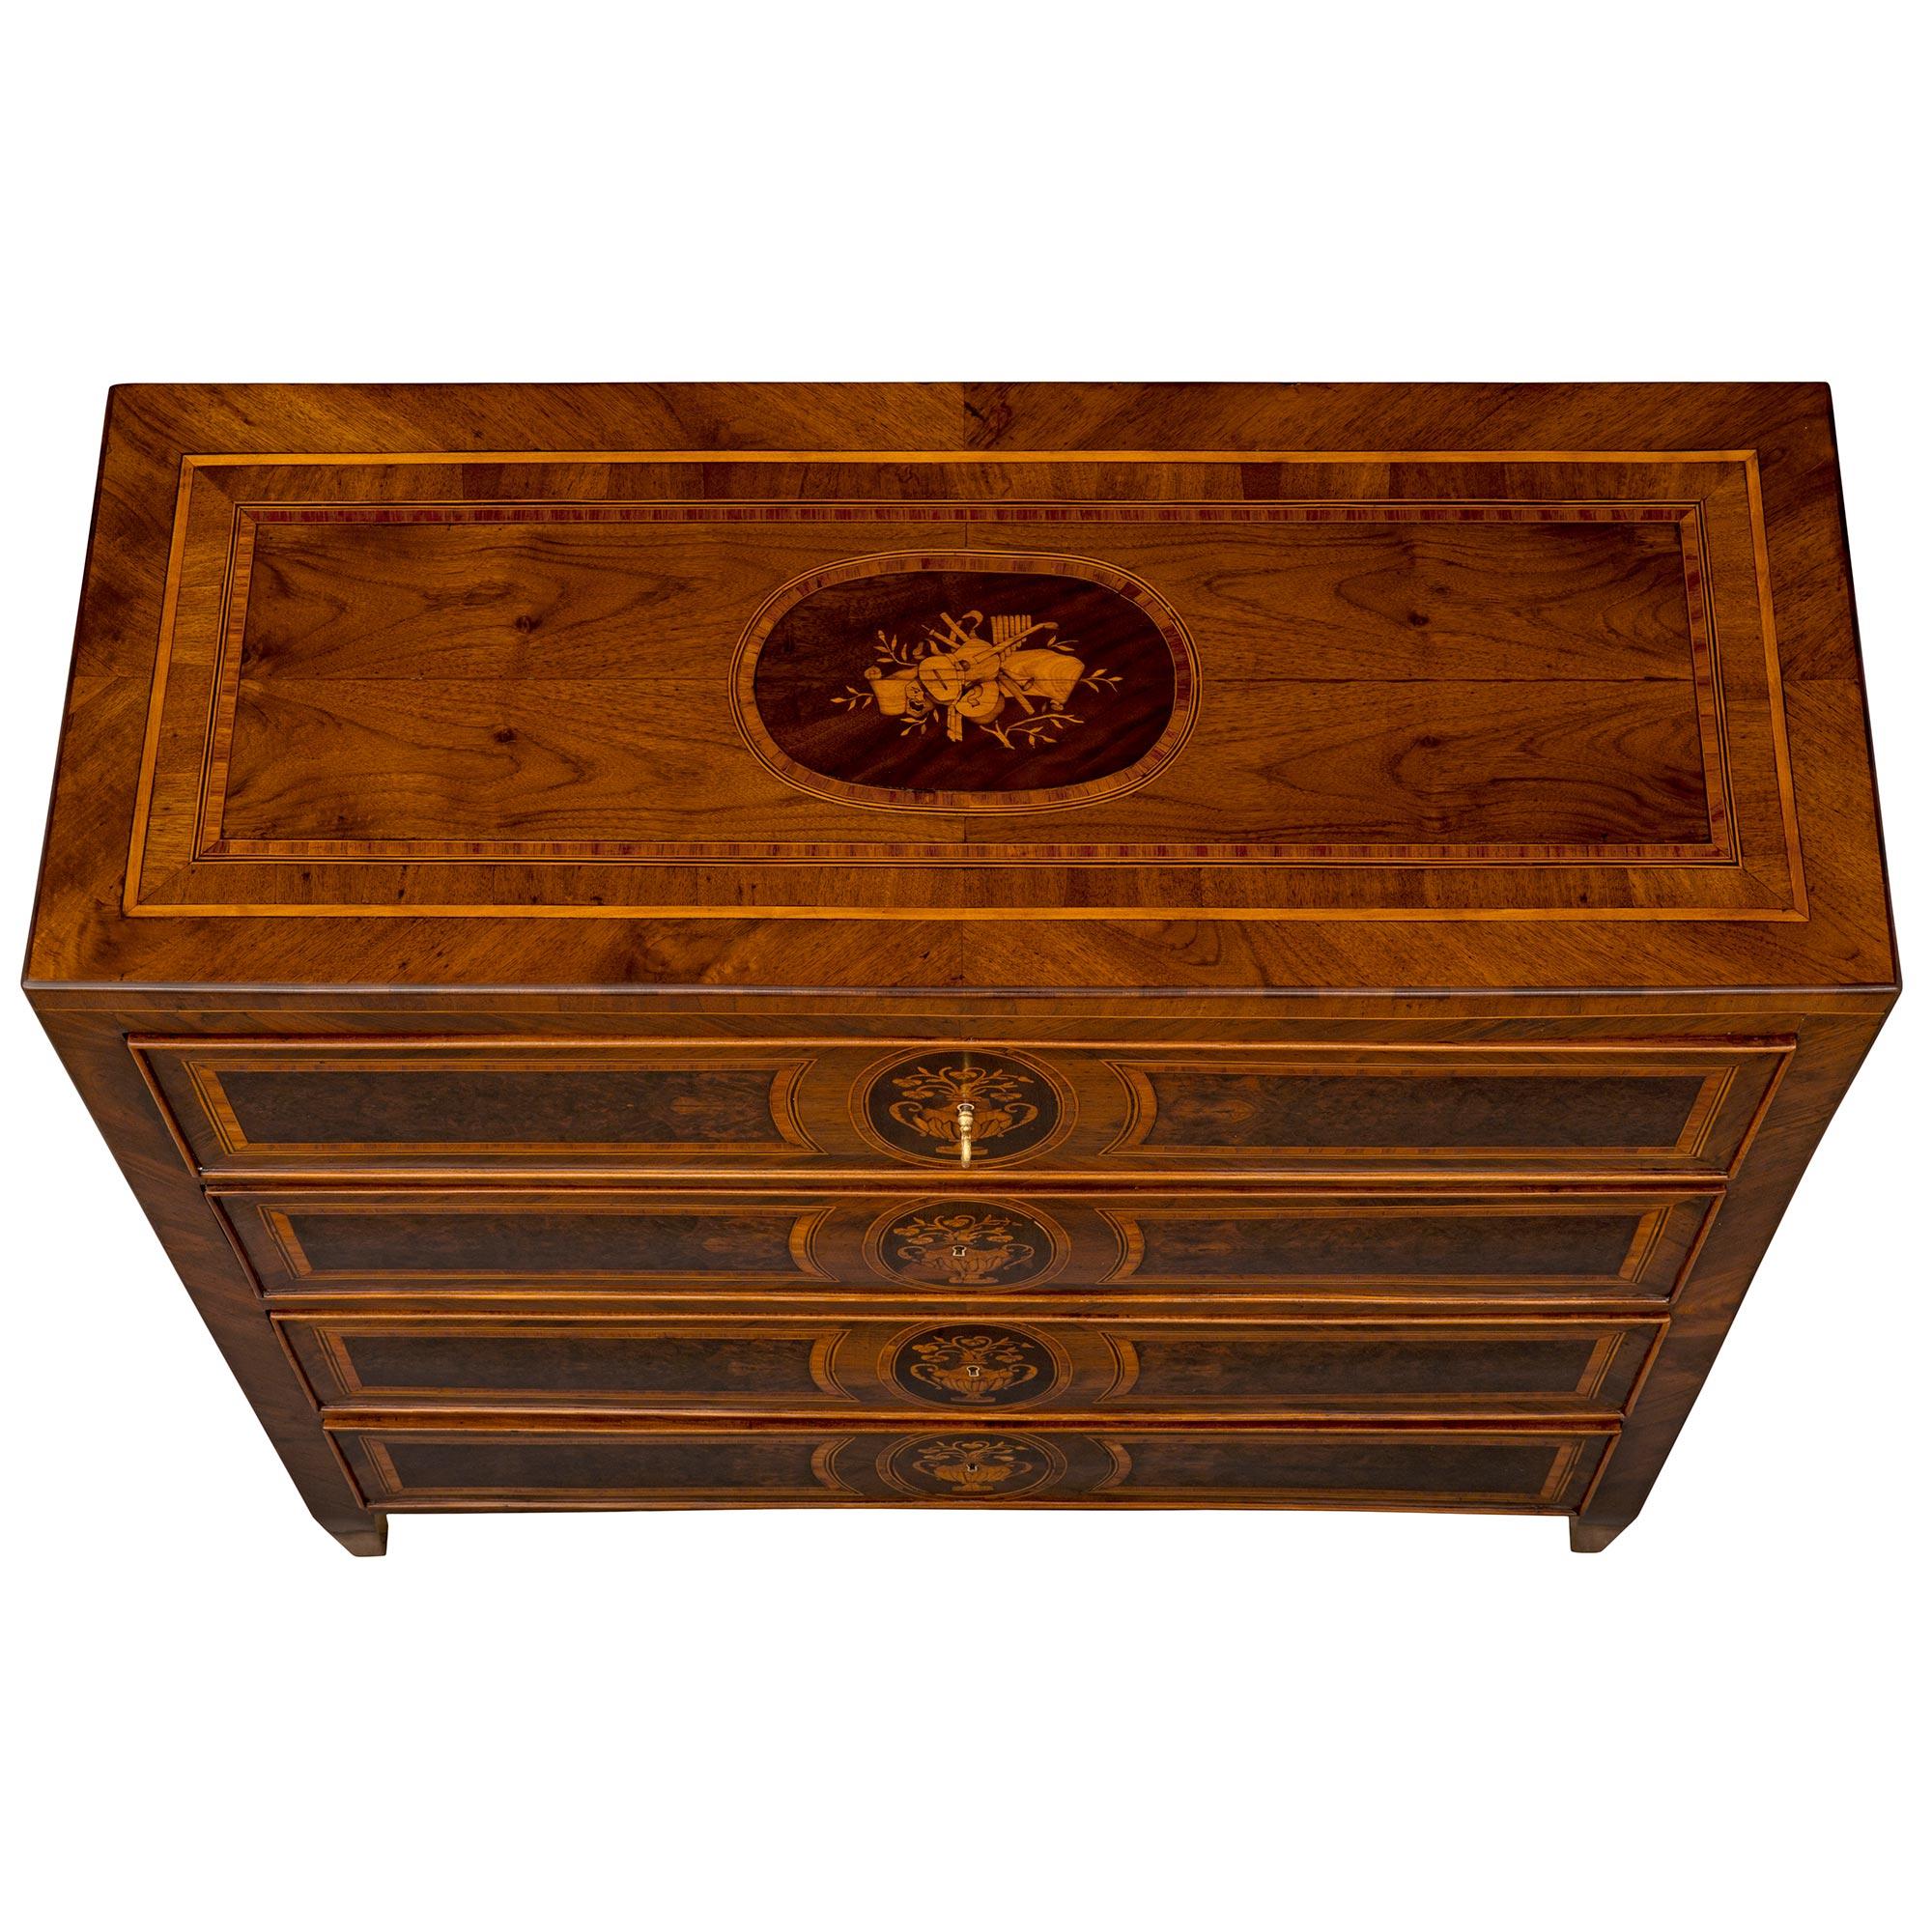 An elegant Italian 18th century Louis XVI period Walnut, Burl Walnut, and Tulipwood commode. The four door chest is raised by fine square tapered legs below the straight frieze. At the center are four drawers each decorated with an intricately